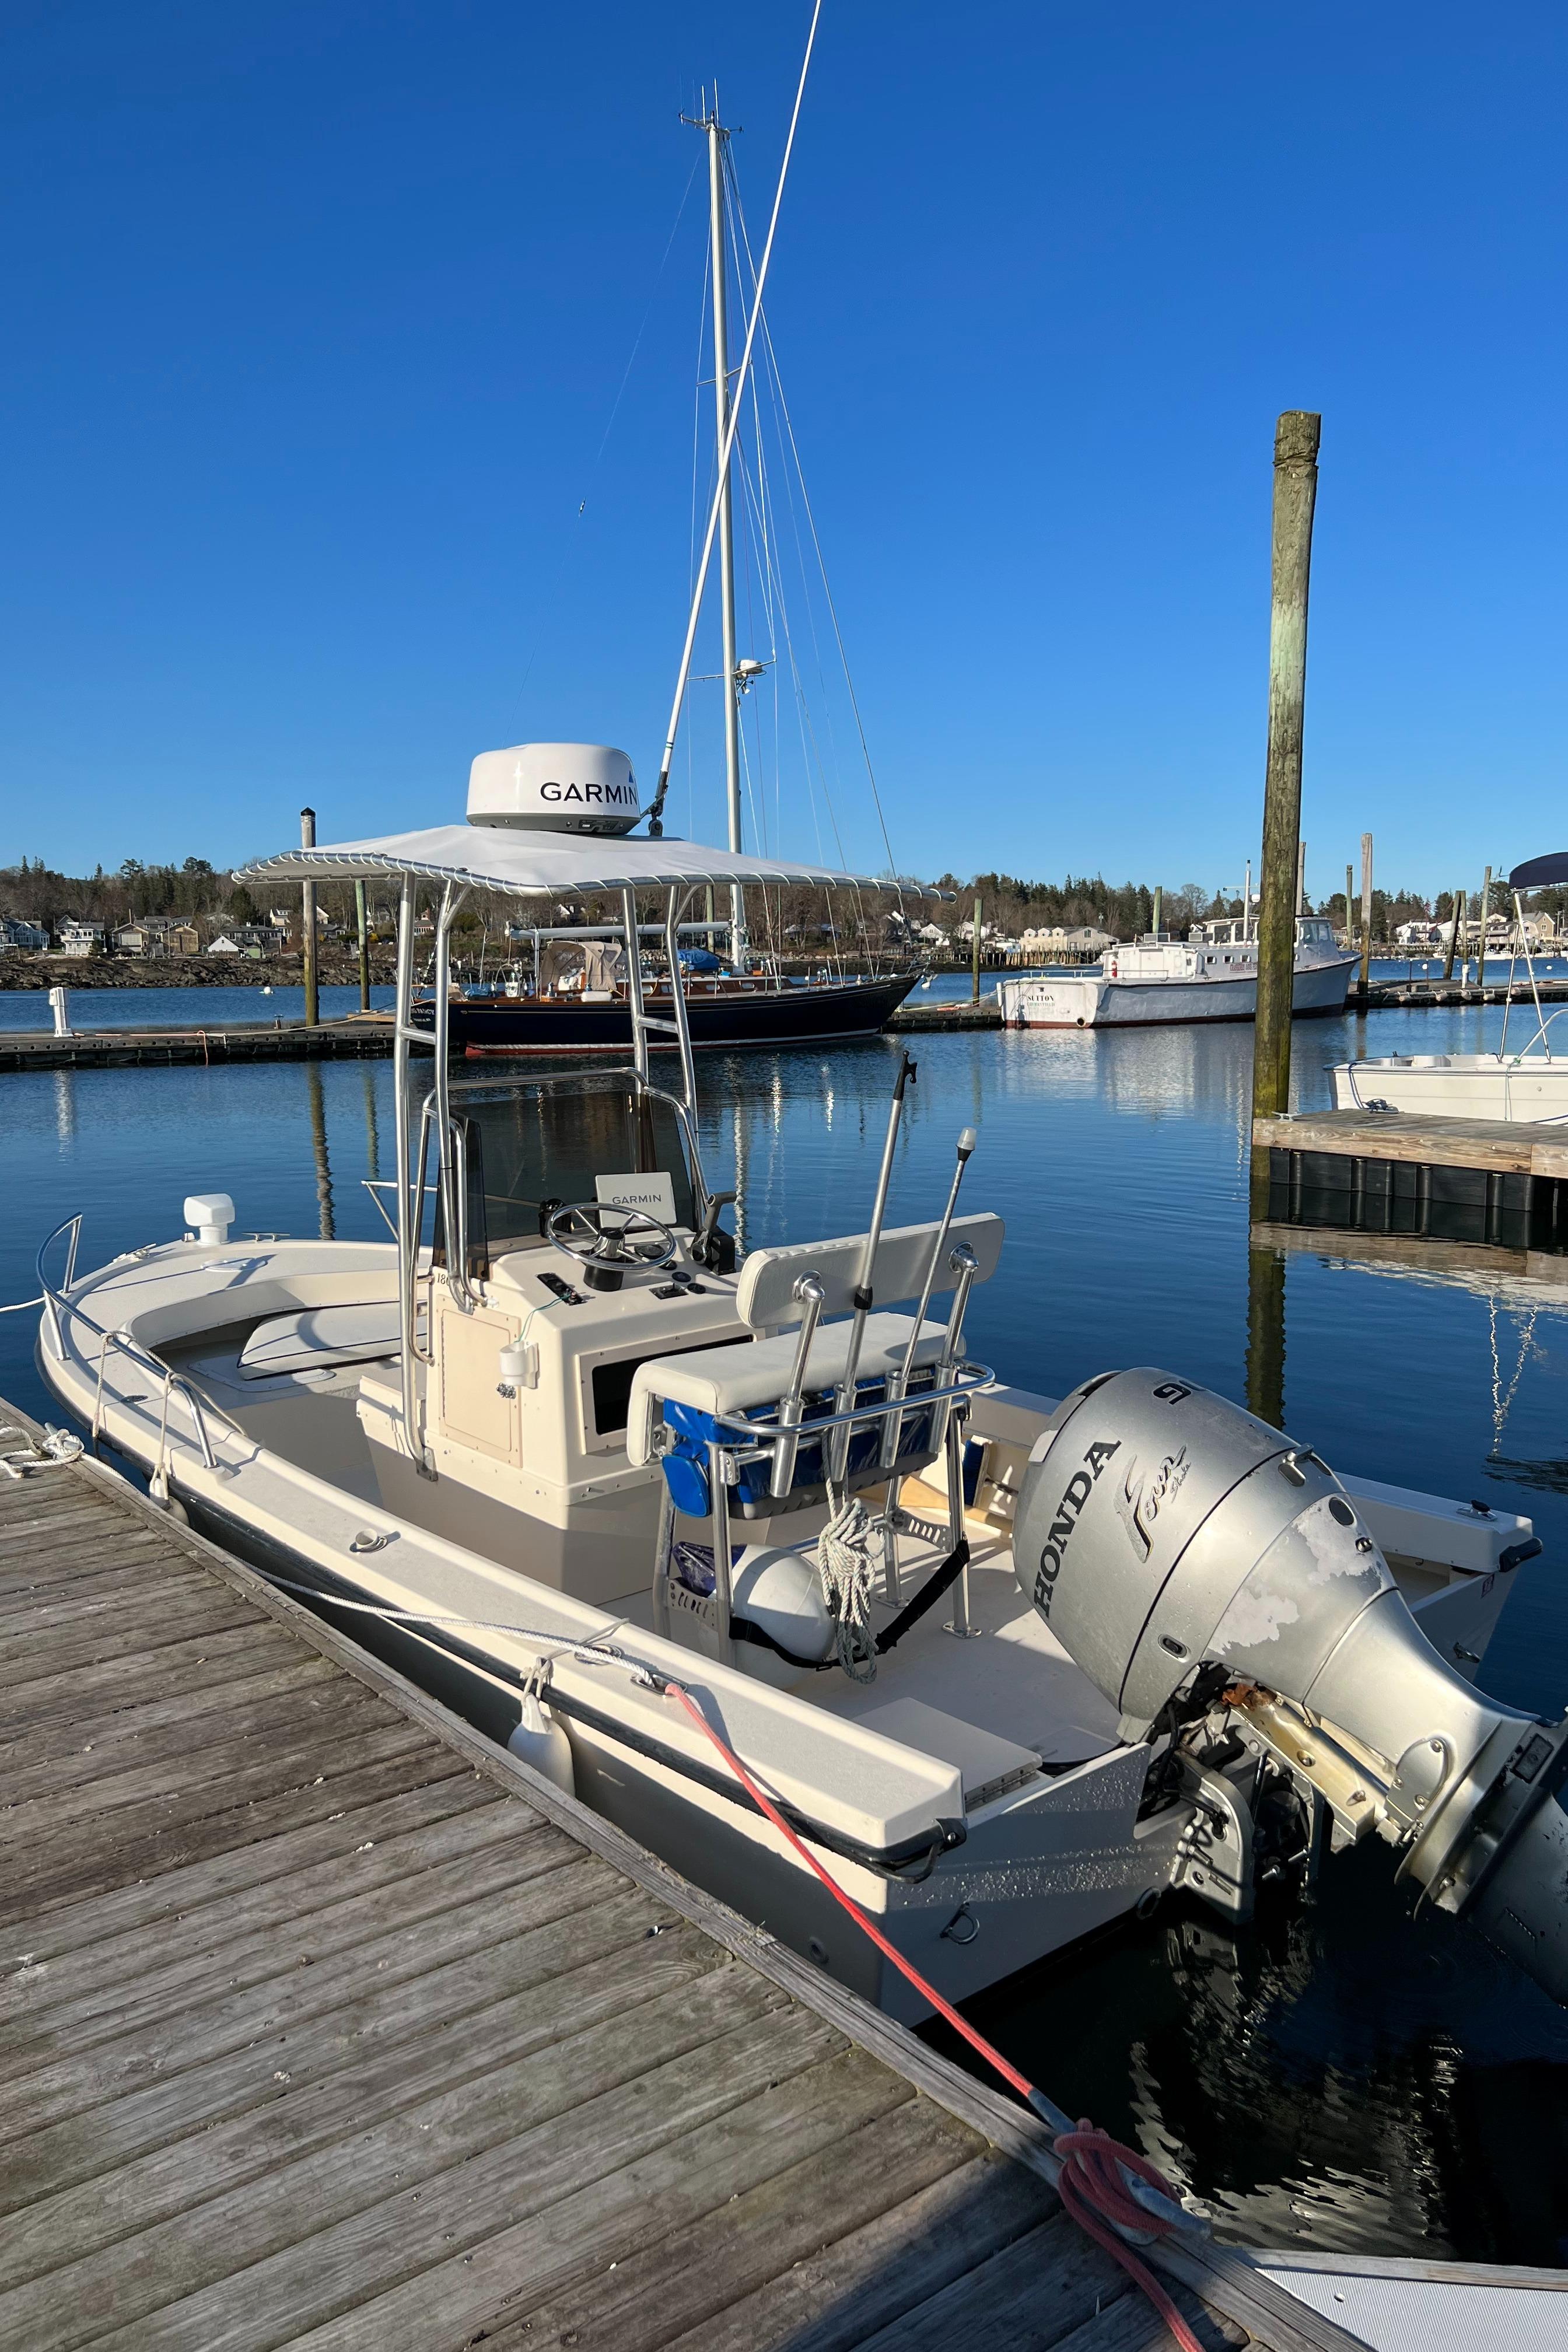 2007 Stanley Stanley 36 Downeast for sale YachtWorld